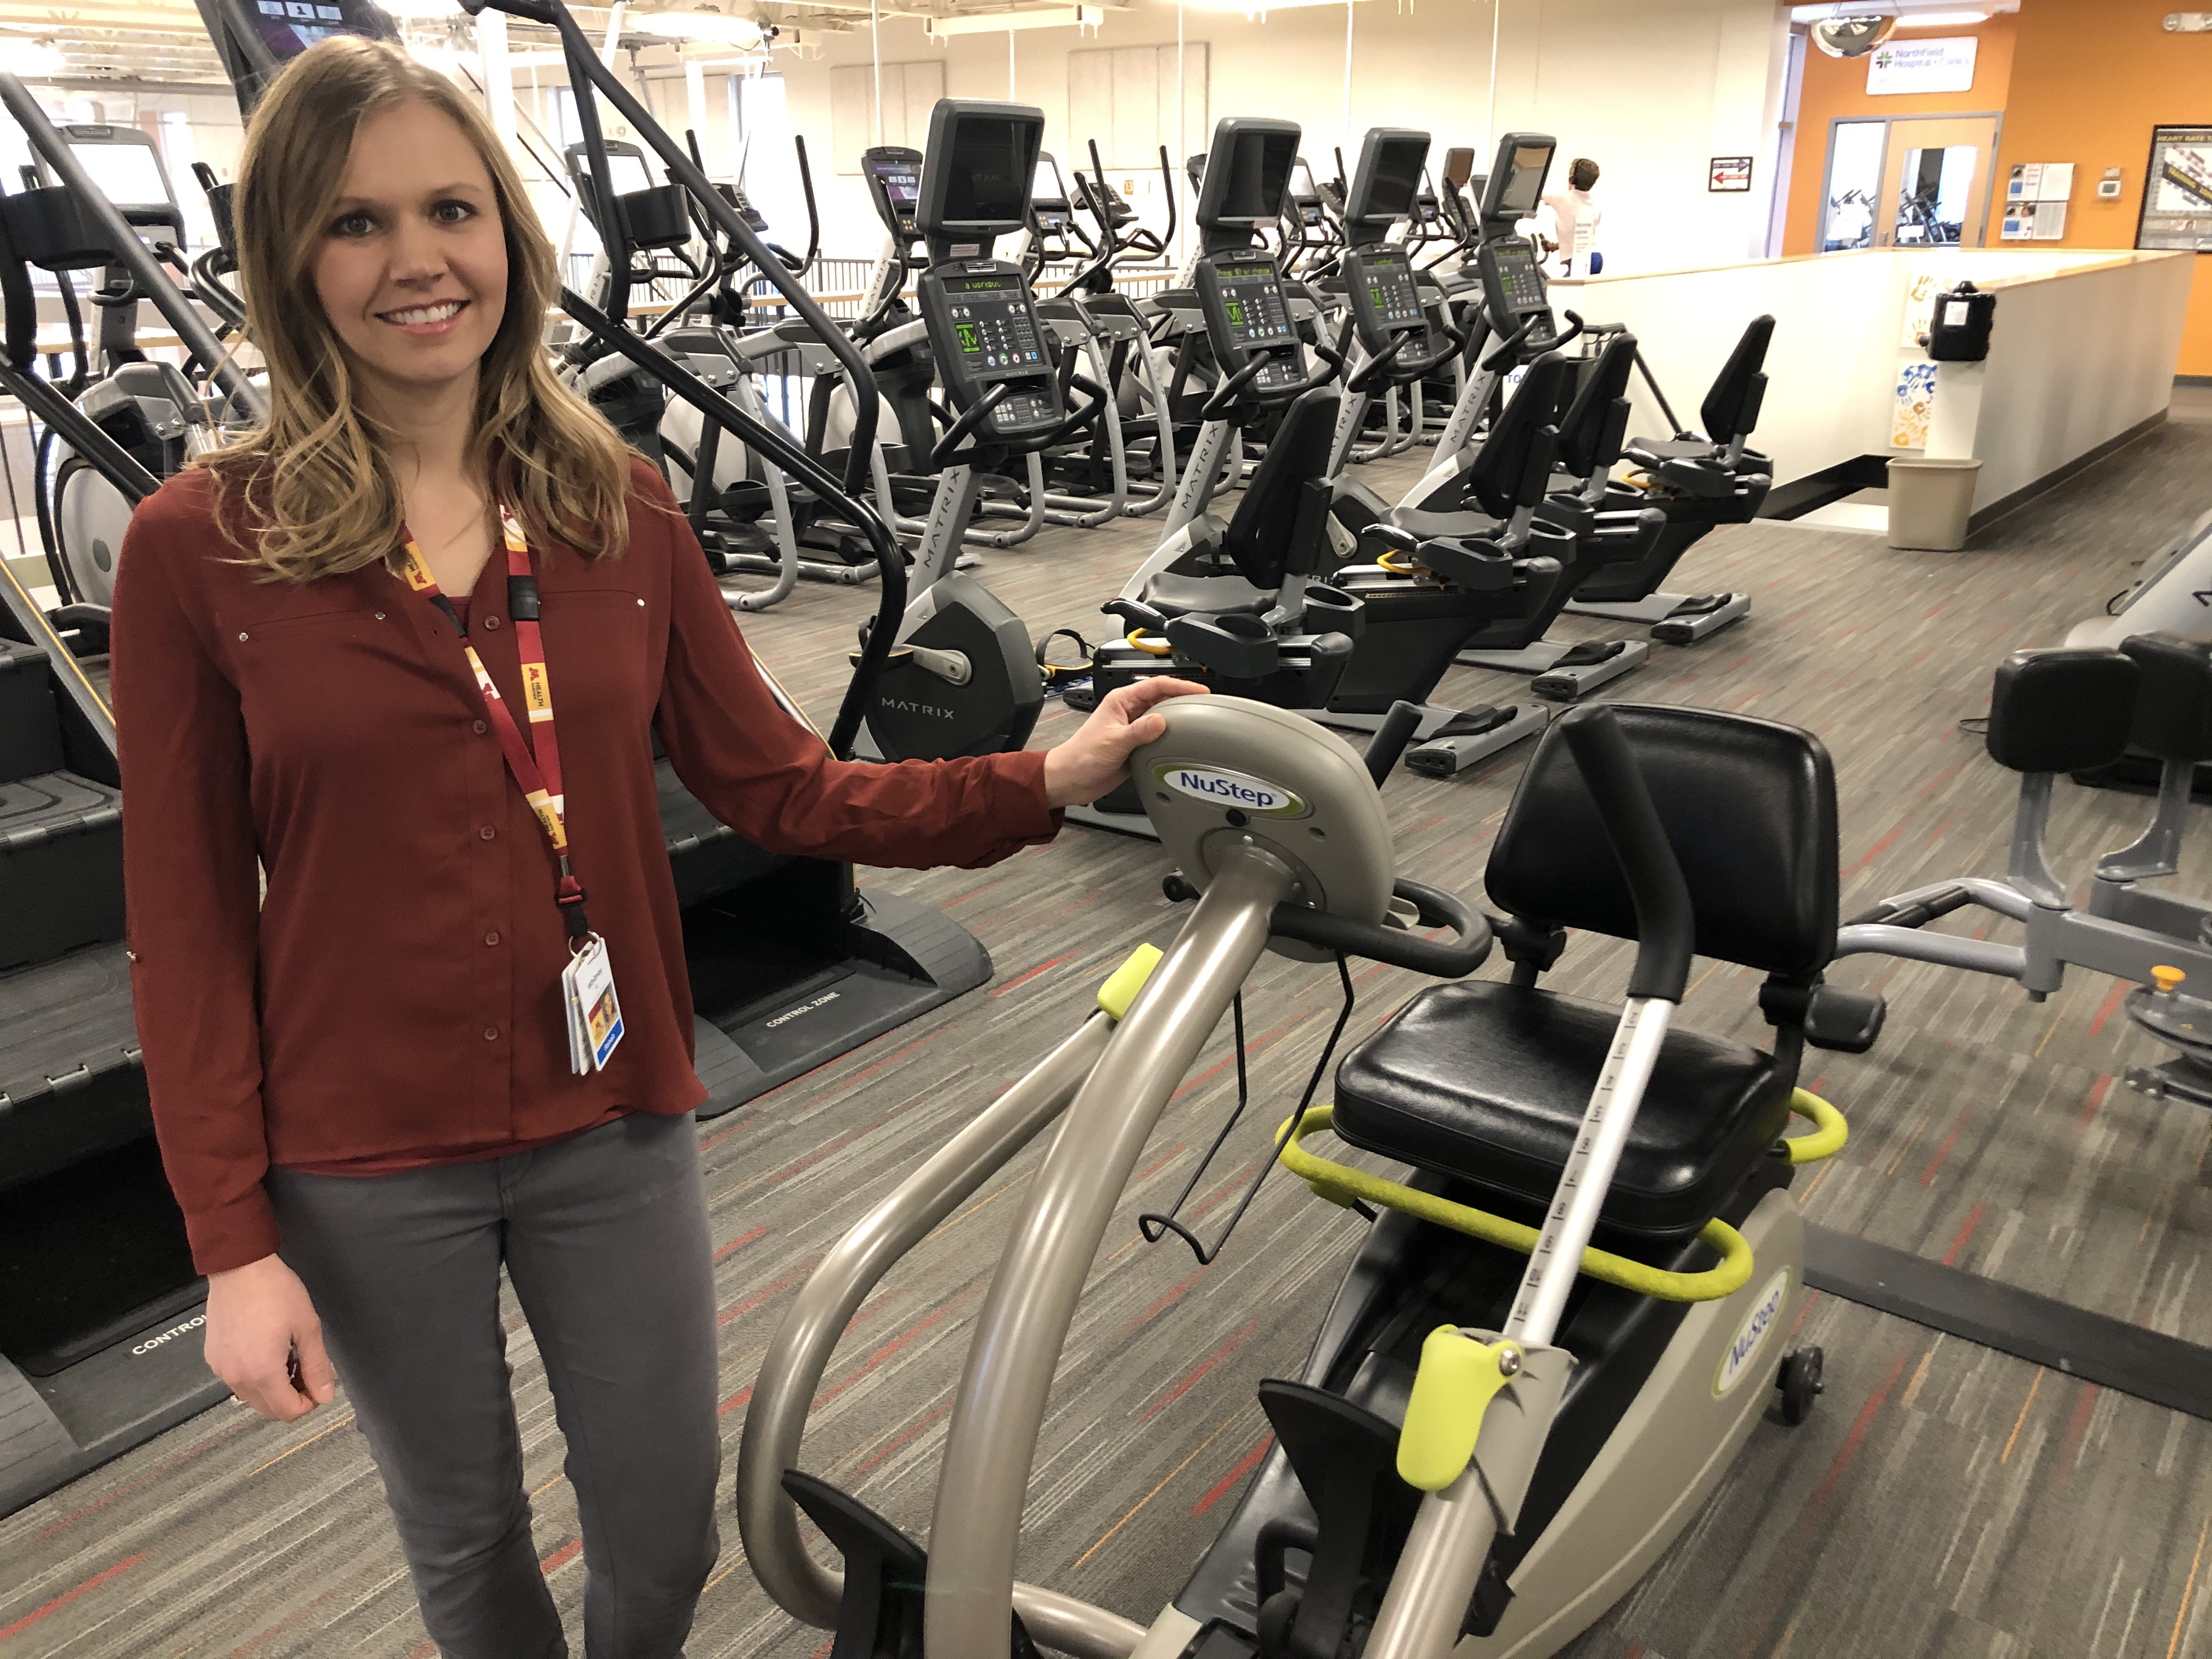 Whitney Quast standing next to a bike in a gym